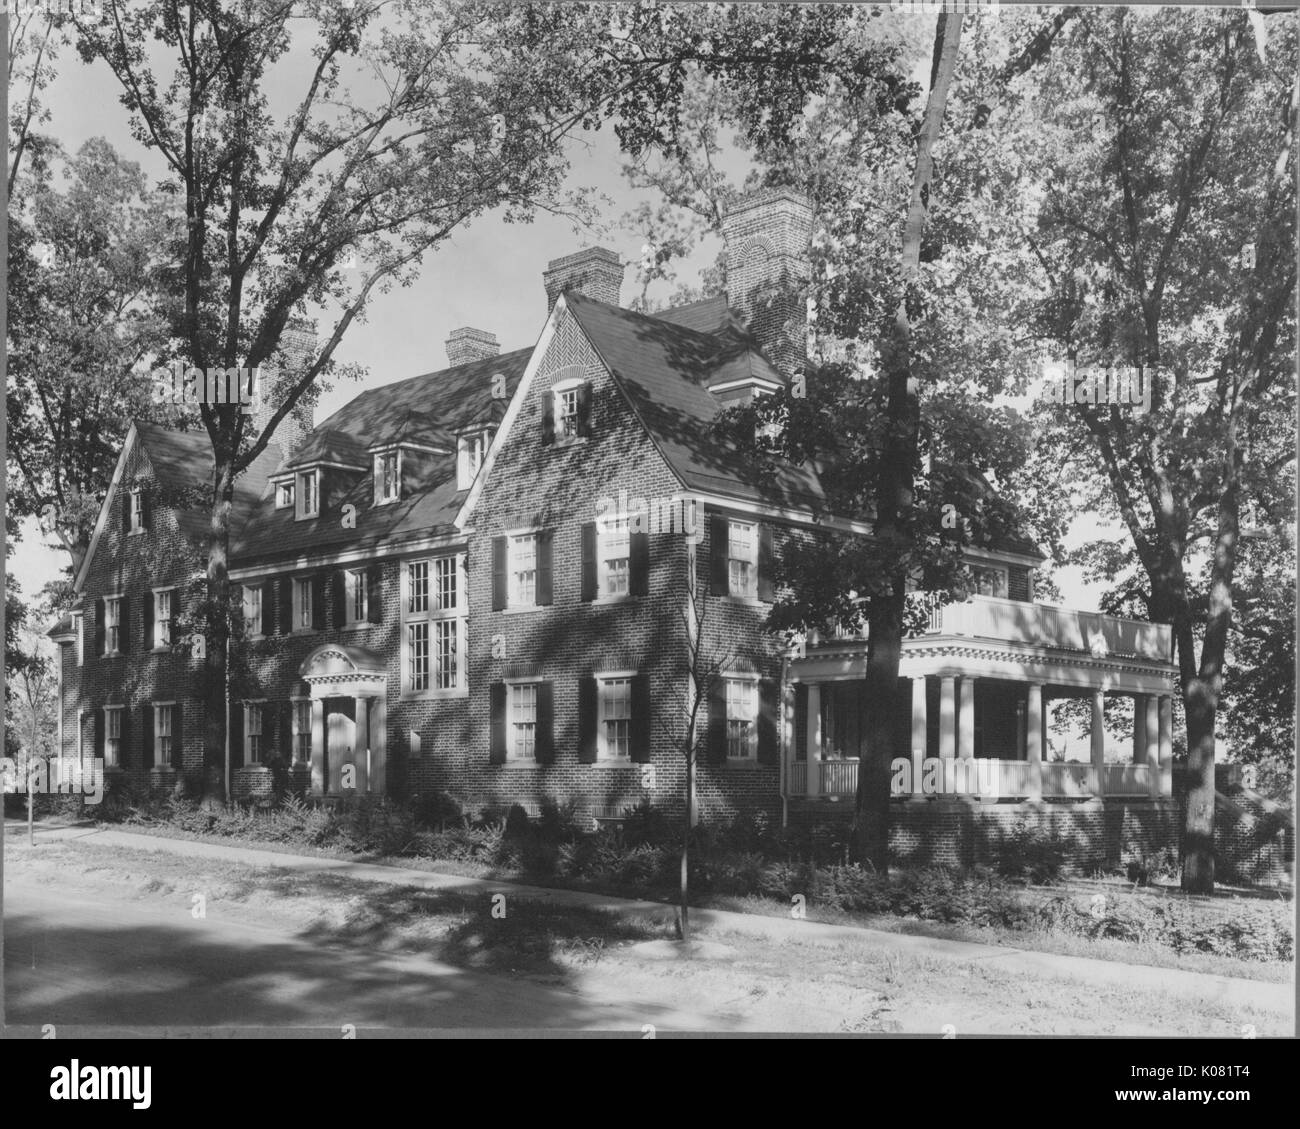 Photograph of a large Roland Park home made of brick, with two large balconies, a two-story home many windows, no front yard, the porch has two Doric columns, and the home is shaded by many leafy trees, United States, 1950. This image is from a series documenting the construction and sale of homes in the Roland Park/Guilford neighborhood of Baltimore, a streetcar suburb and one of the first planned communities in the United States. Stock Photo